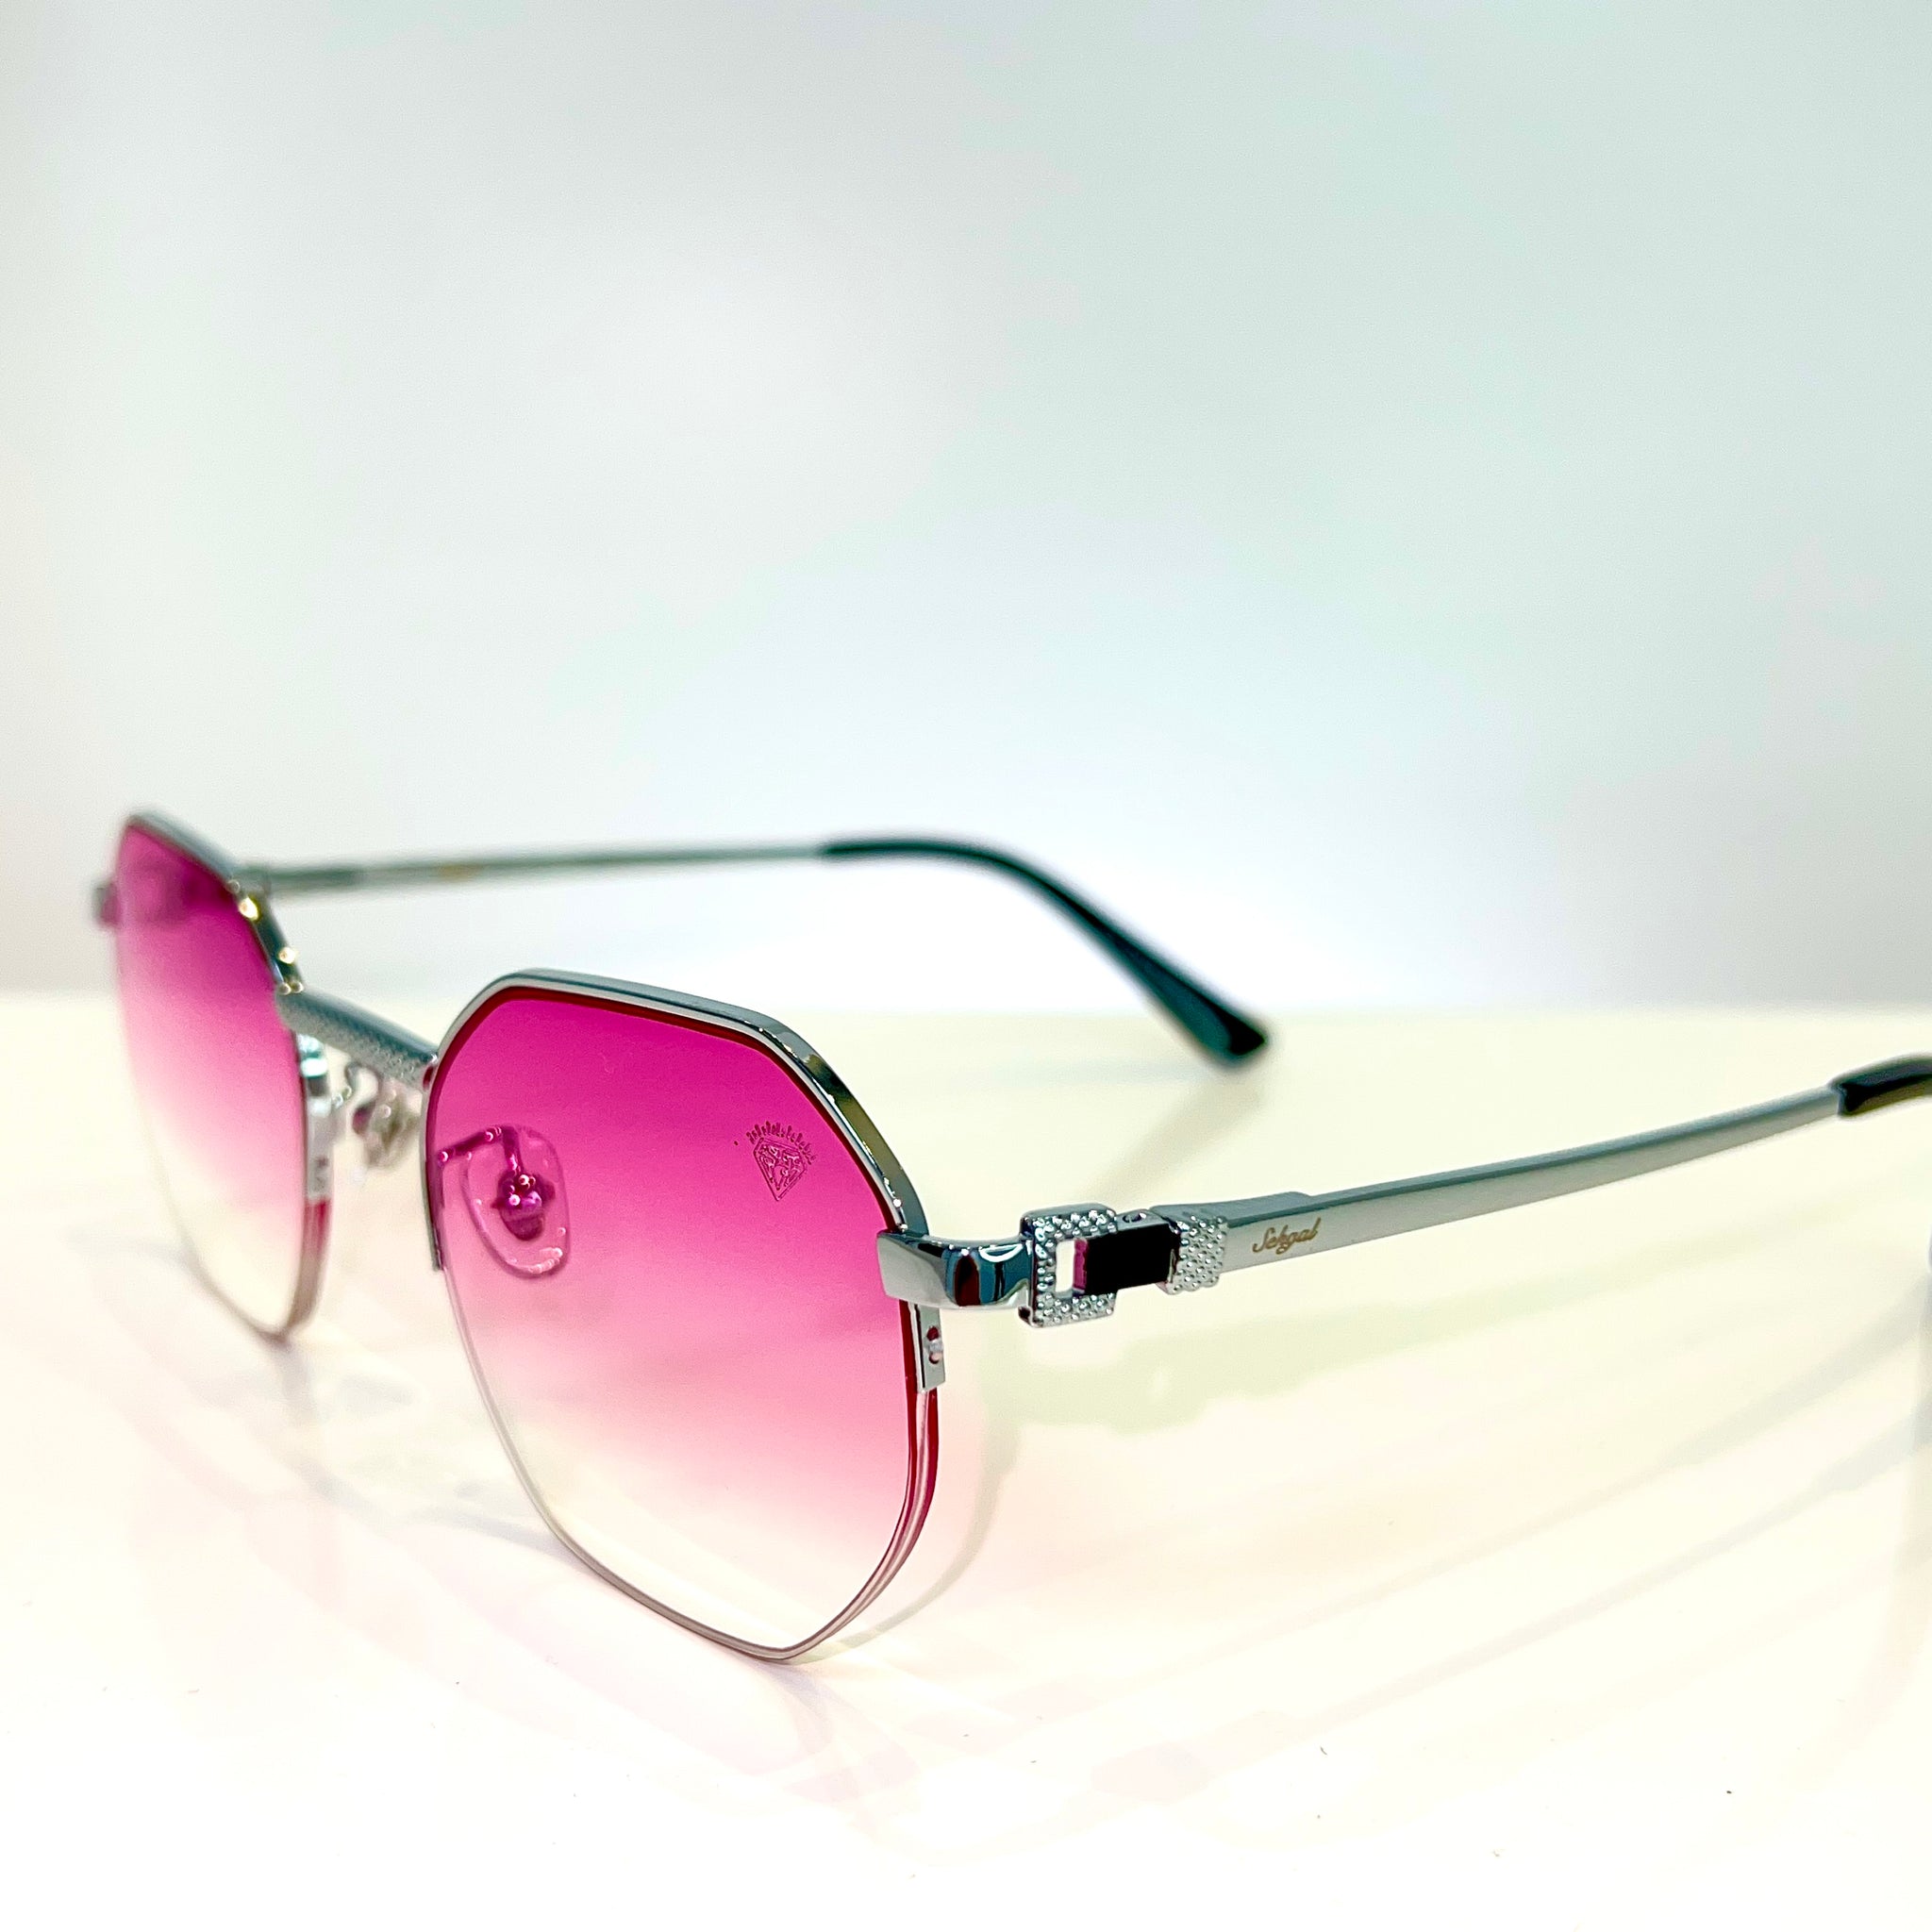 Los Angeles Glasses - 14 carat gold plated -  Pink Shade